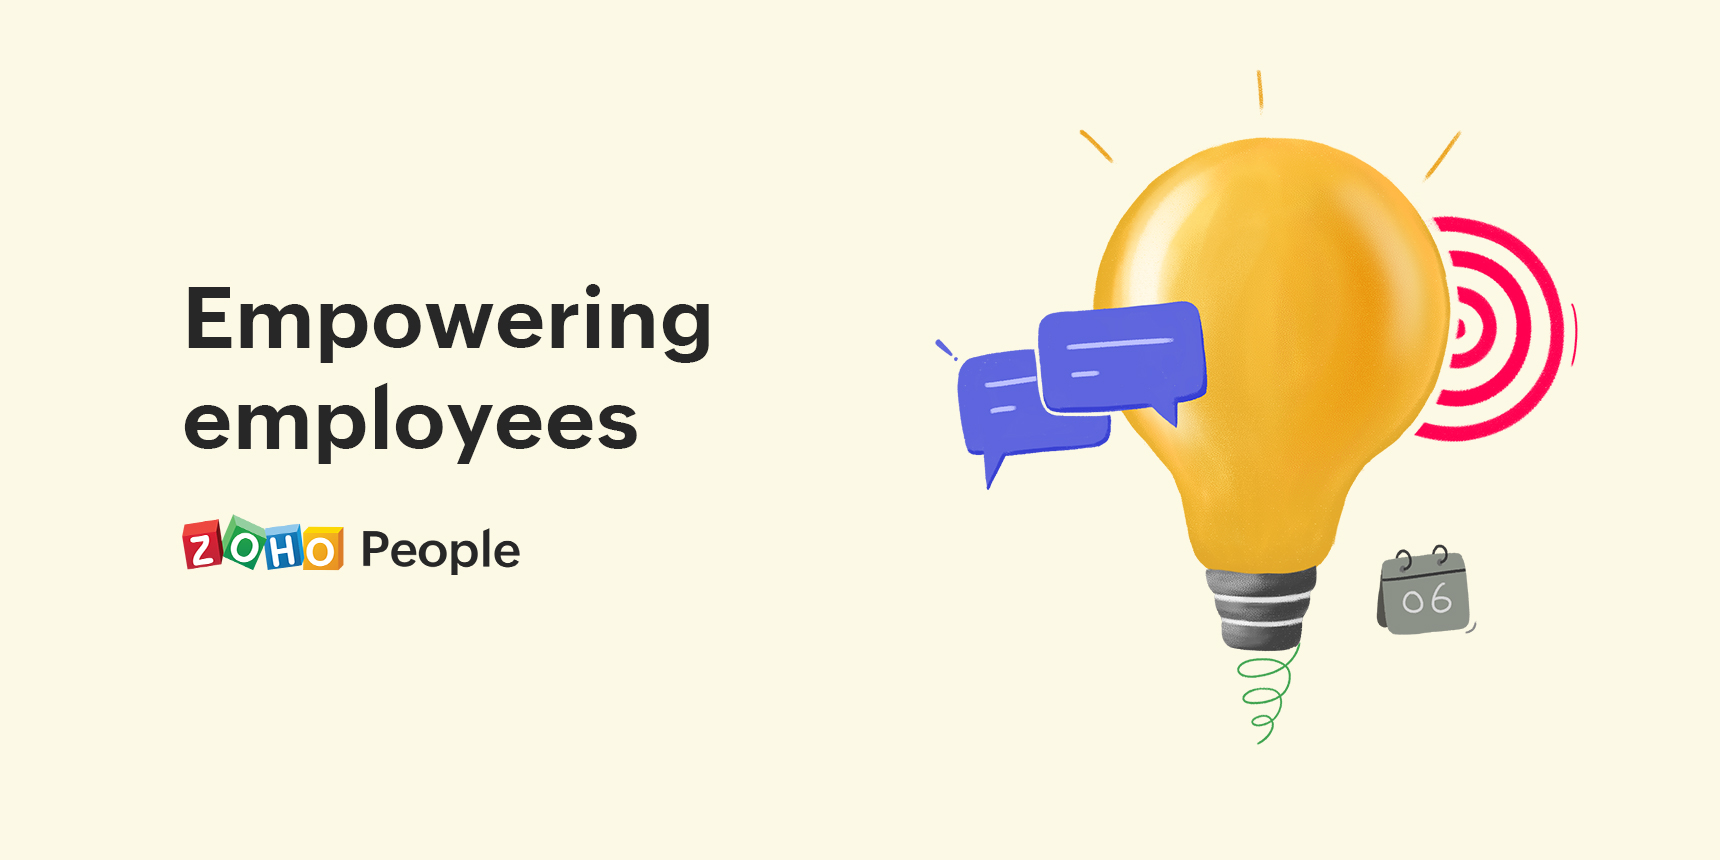 Empowering employees at workplace